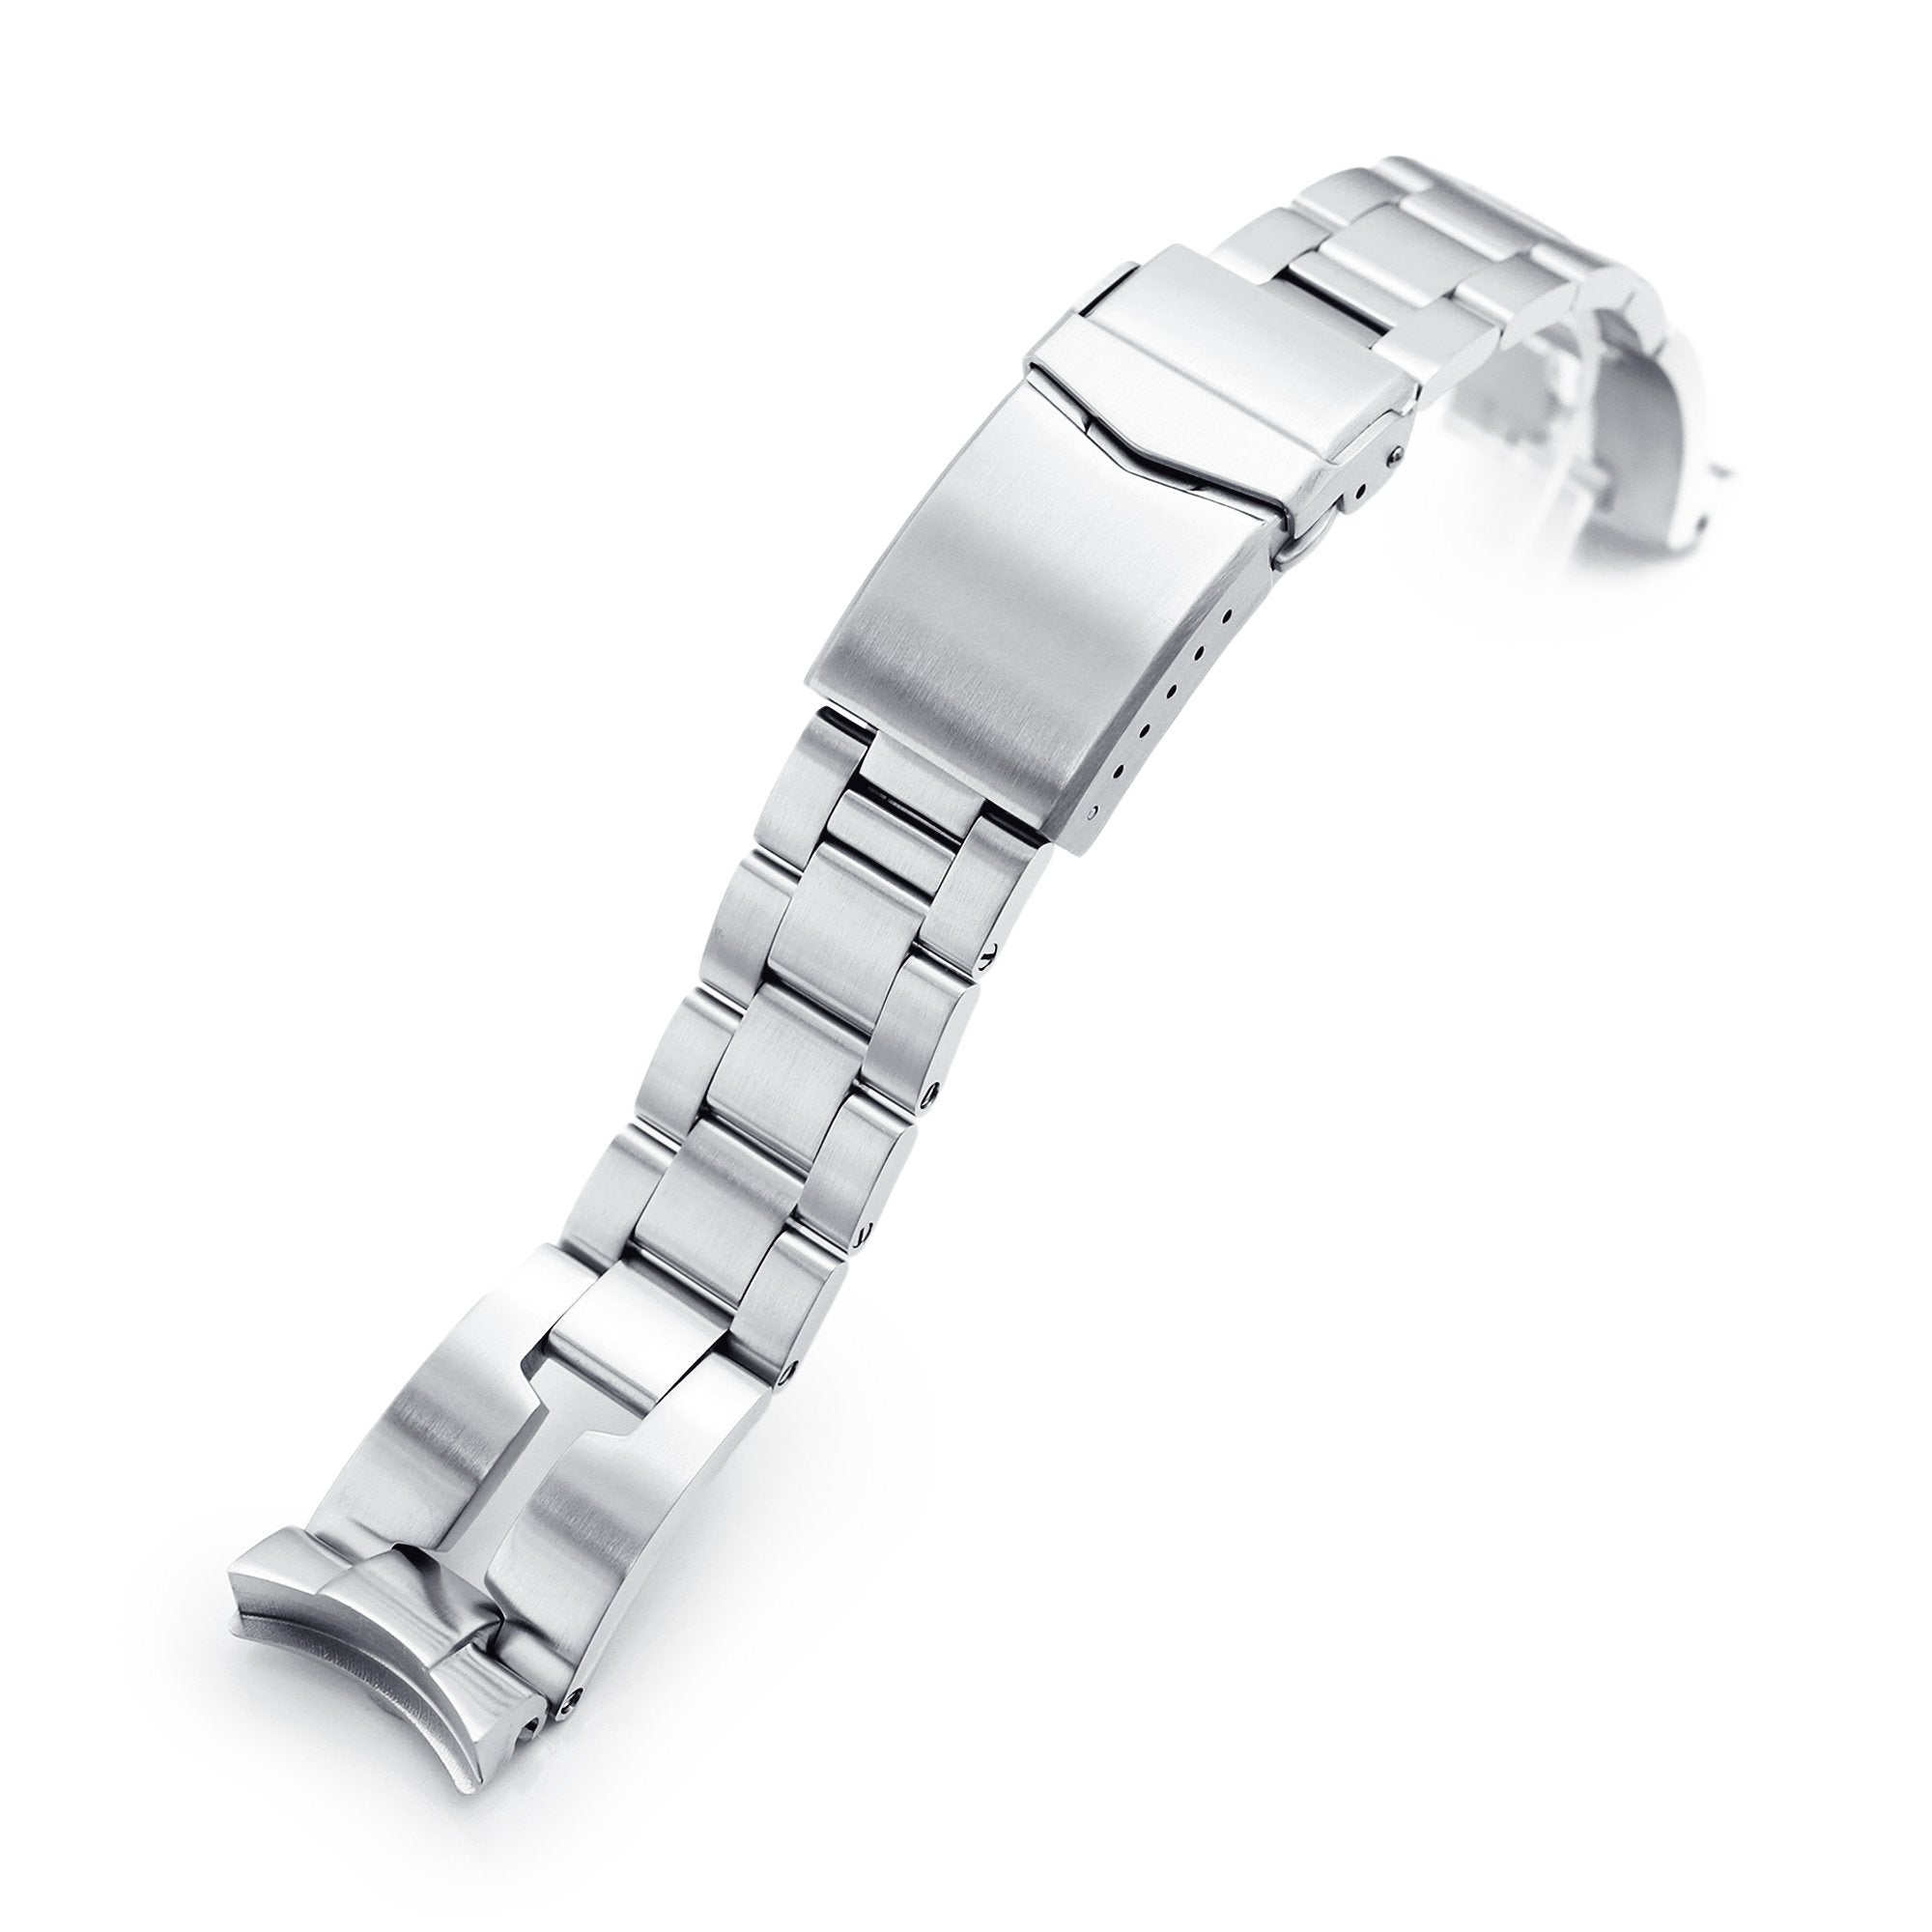 20mm Retro Razor 316L Stainless Steel Watch Bracelet for Seiko SKX013 Brushed V-Clasp Strapcode Watch Bands